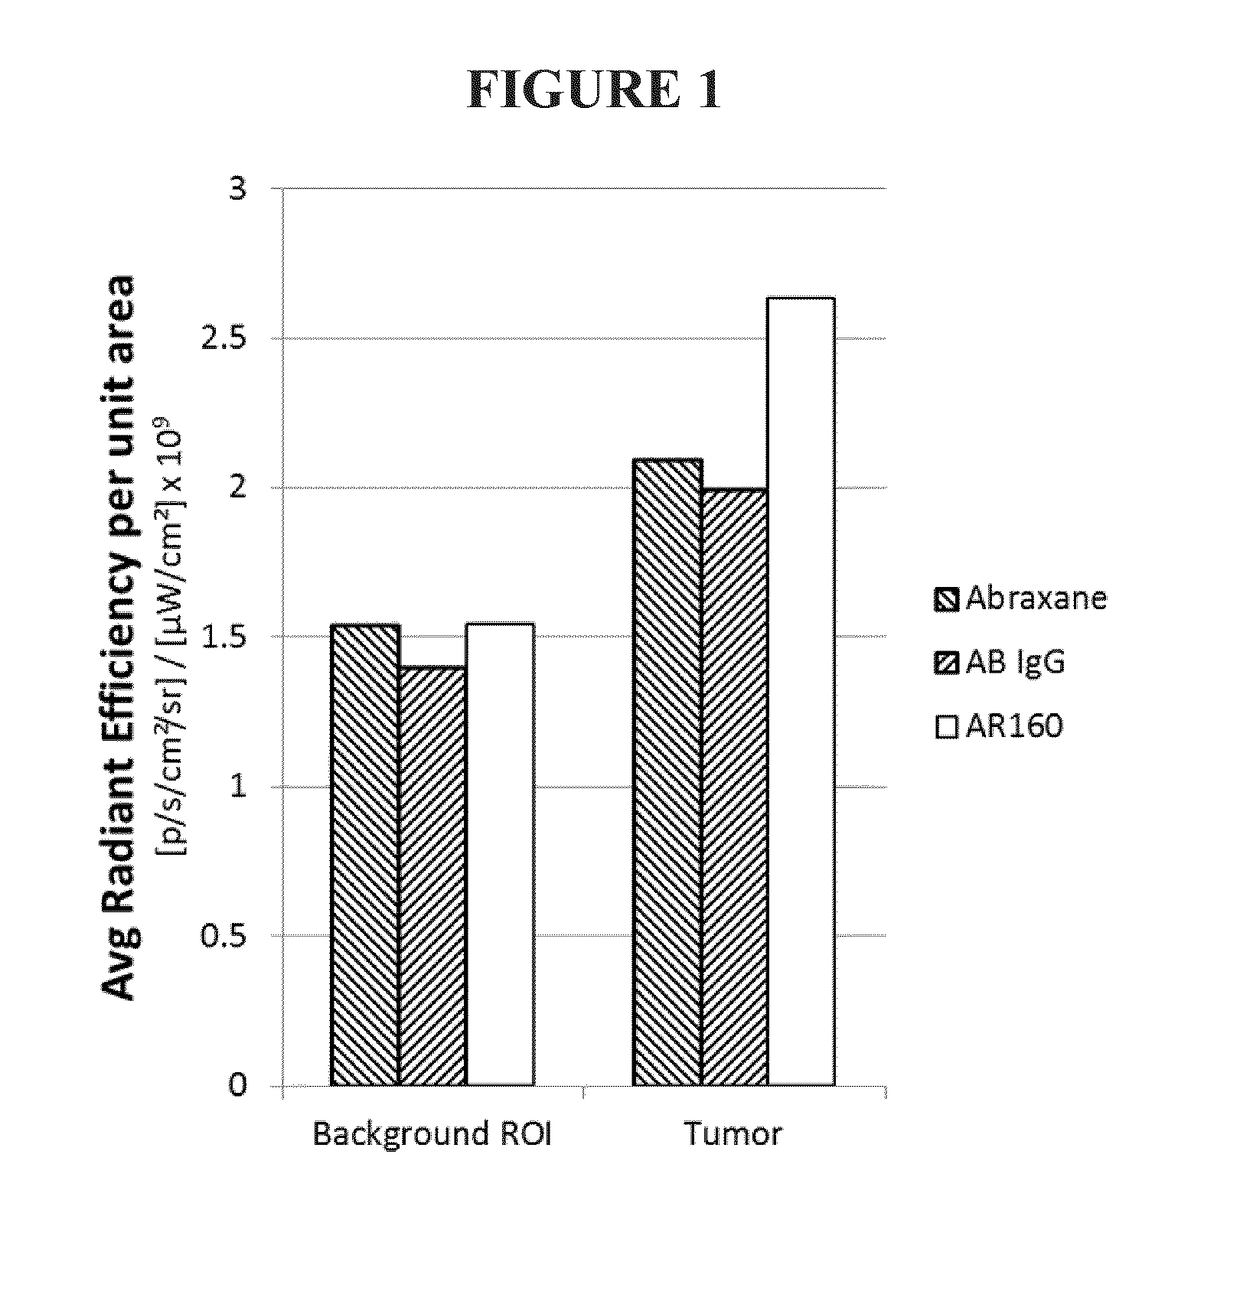 Methods for improving the therapeutic index for a chemotherapeutic drug